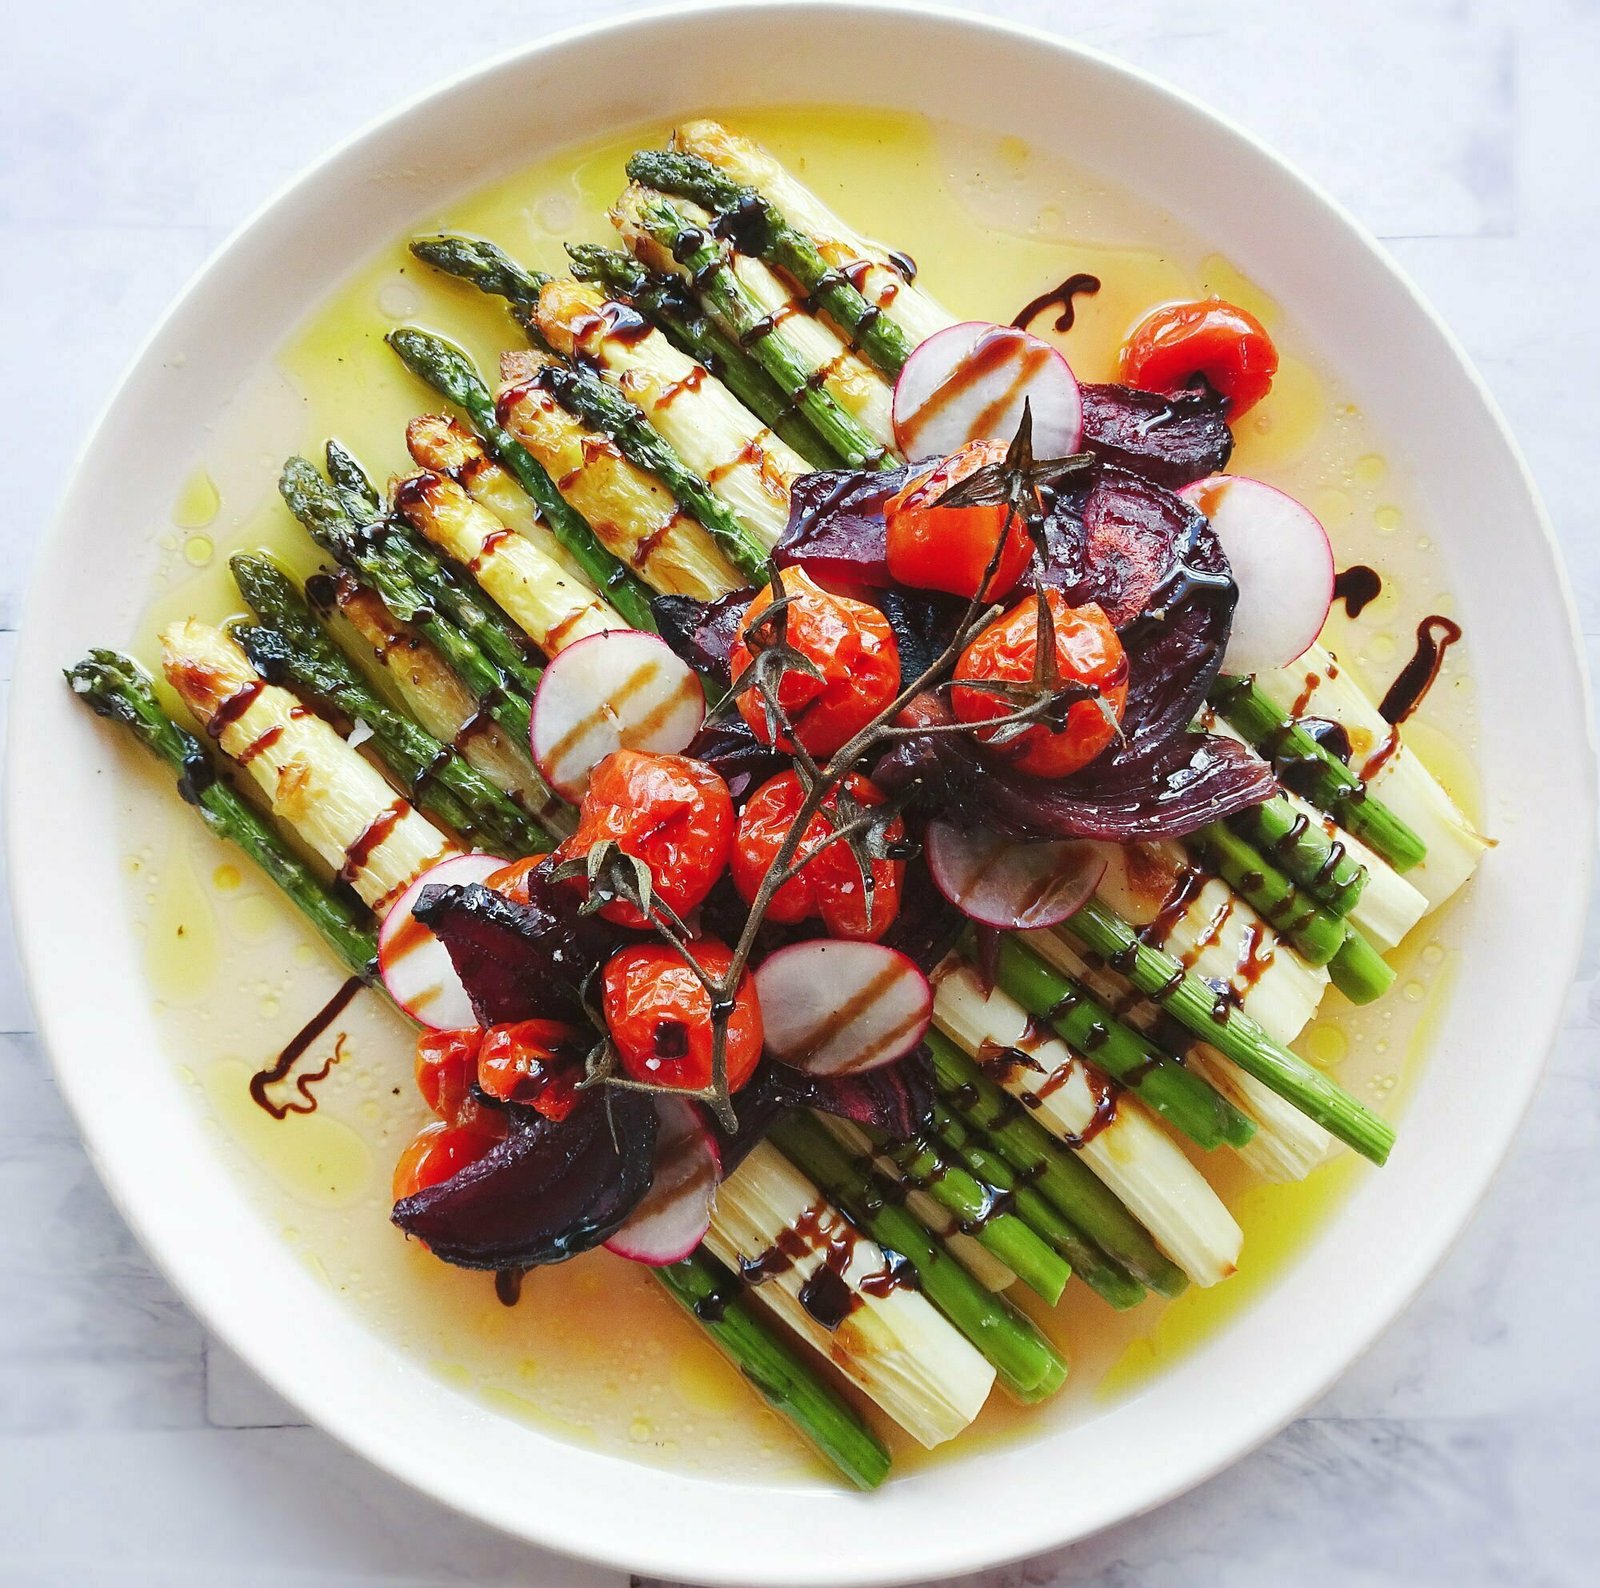 A stack of greenand white asparagus sits on a large white plate with cherry tomatoes, roasted beets and radishes for a garnish